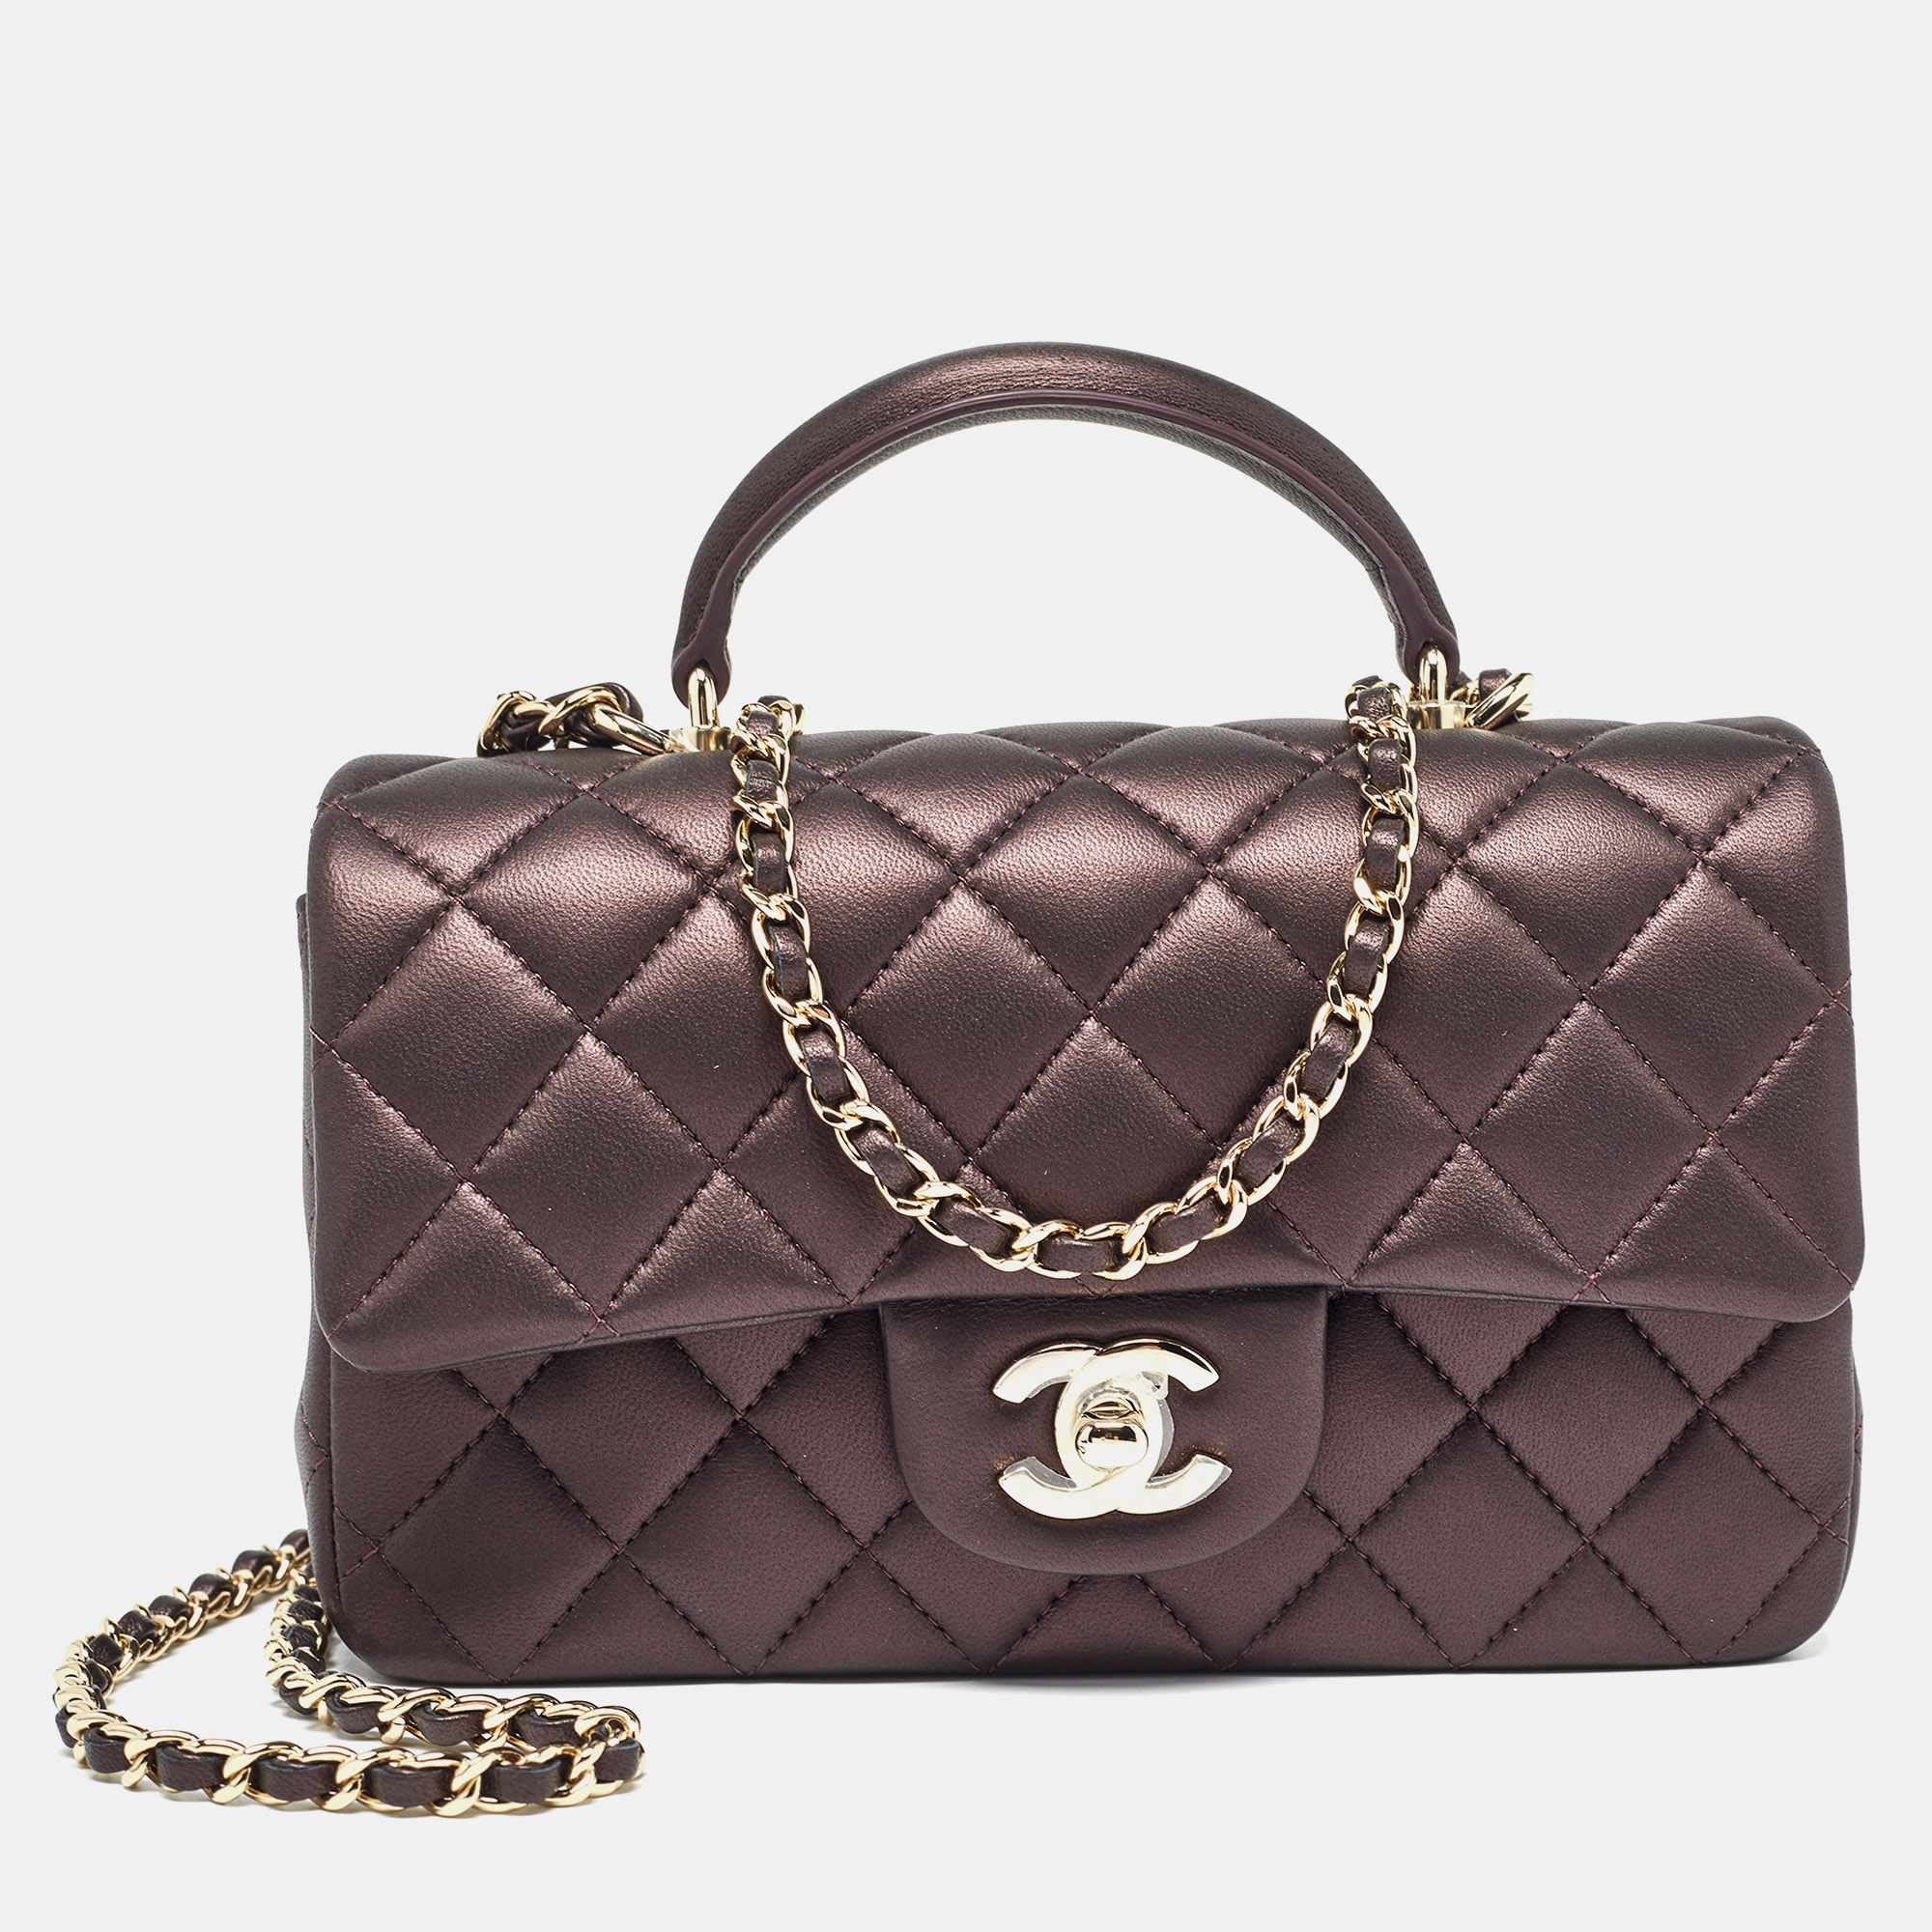 

Chanel Burgundy Iridescent Quilted Leather Mini Rectangular Flap Top Handle Bag